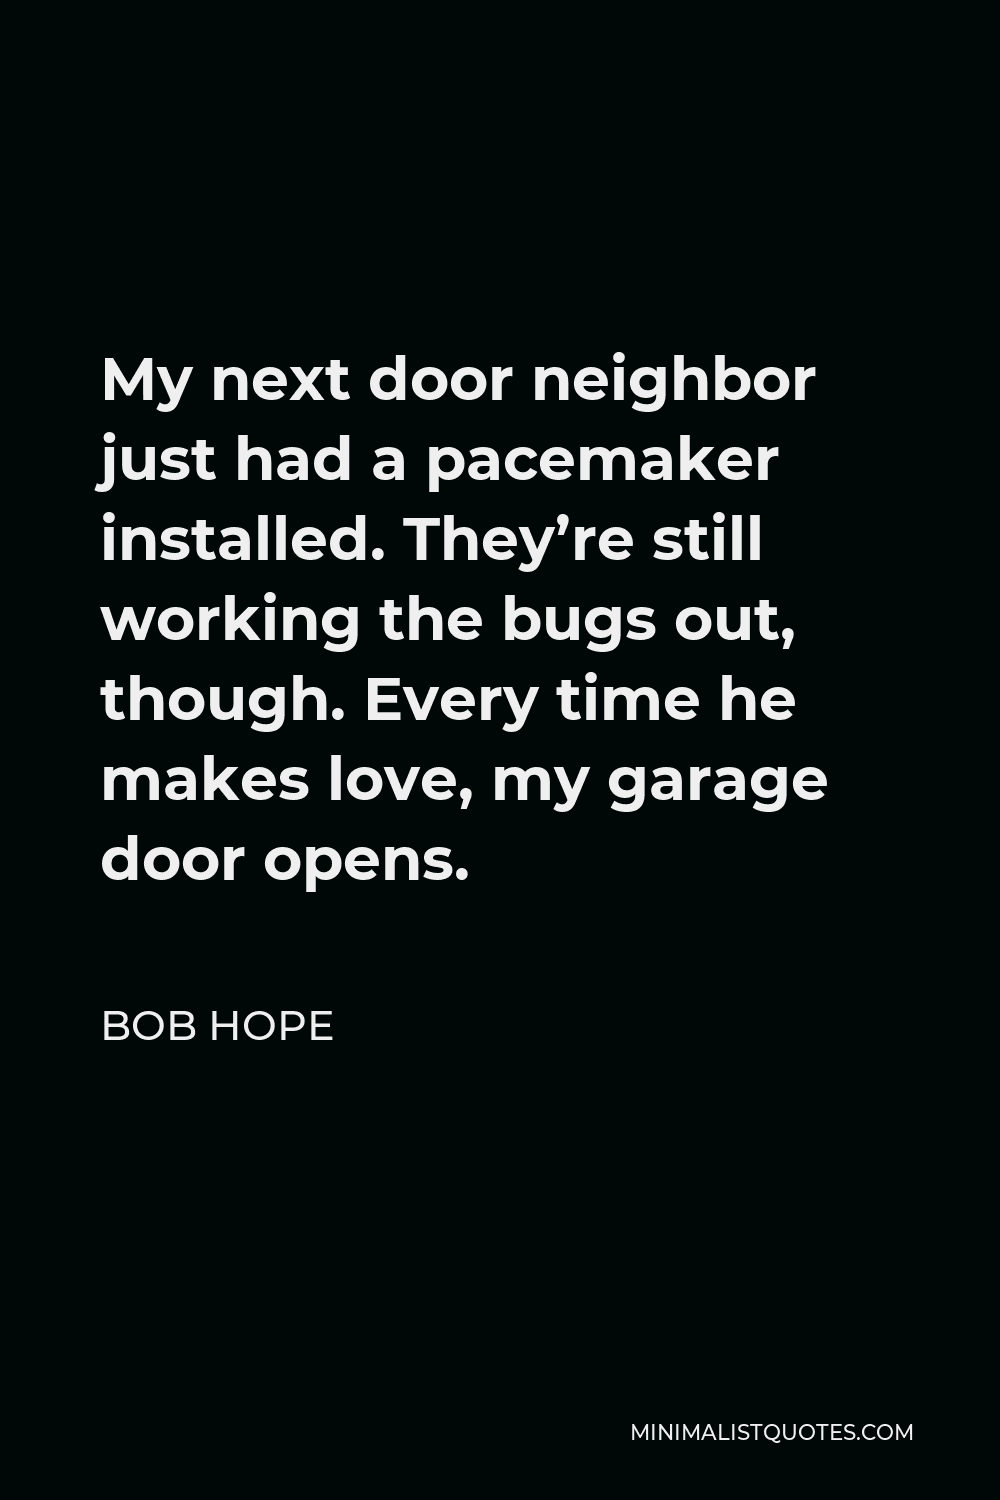 Bob Hope Quote - My next door neighbor just had a pacemaker installed. They’re still working the bugs out, though. Every time he makes love, my garage door opens.